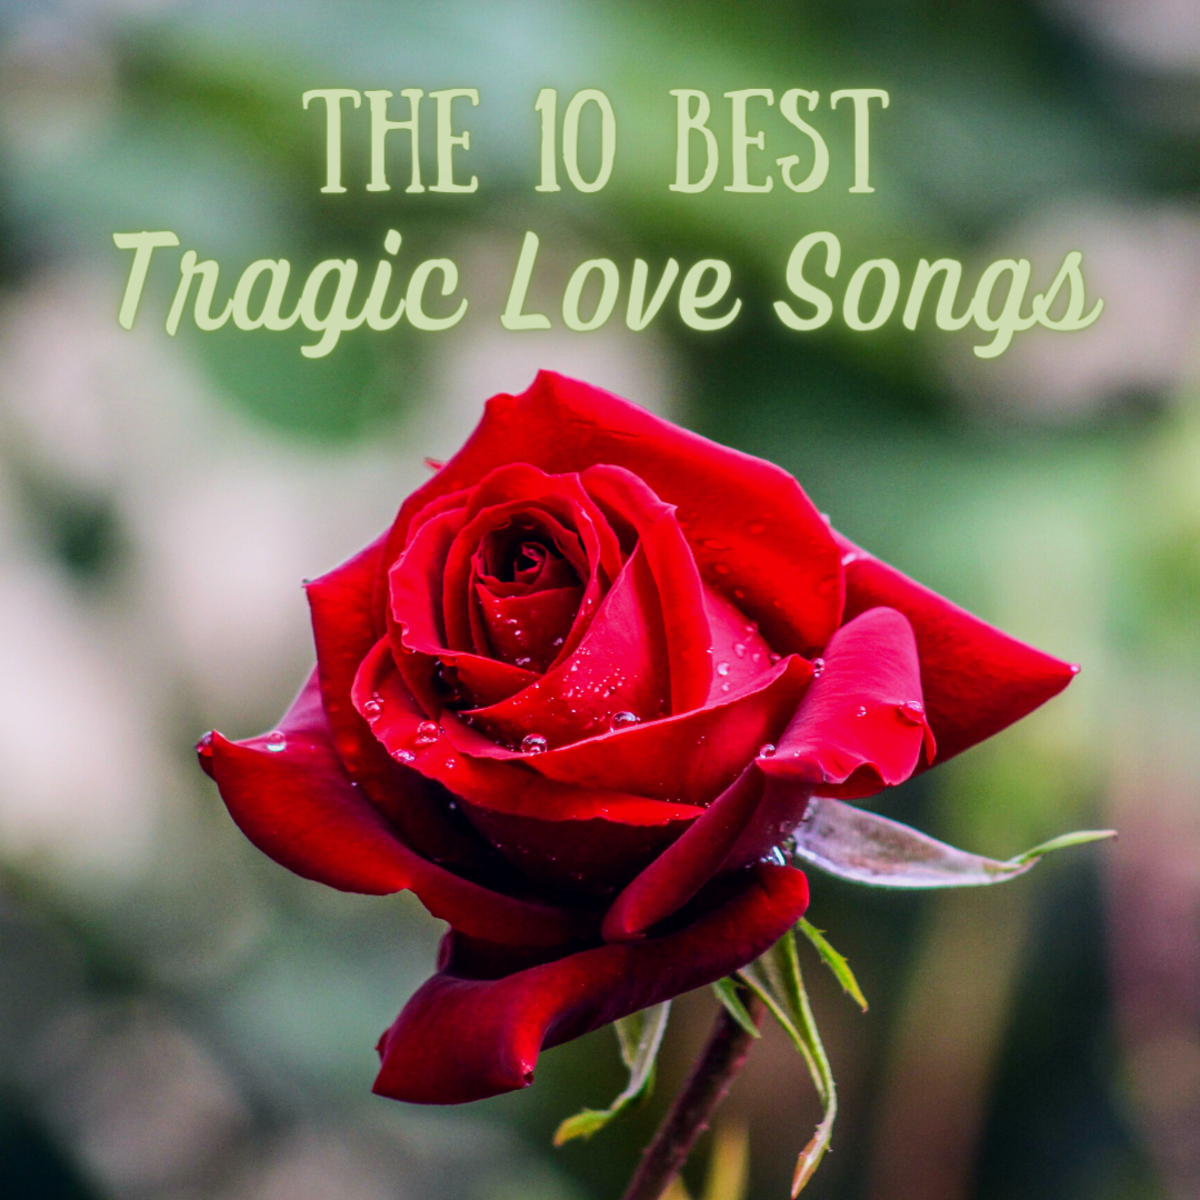 Love, Death, and Tragedy: 10 Sad Love Songs That Will Break Your Heart